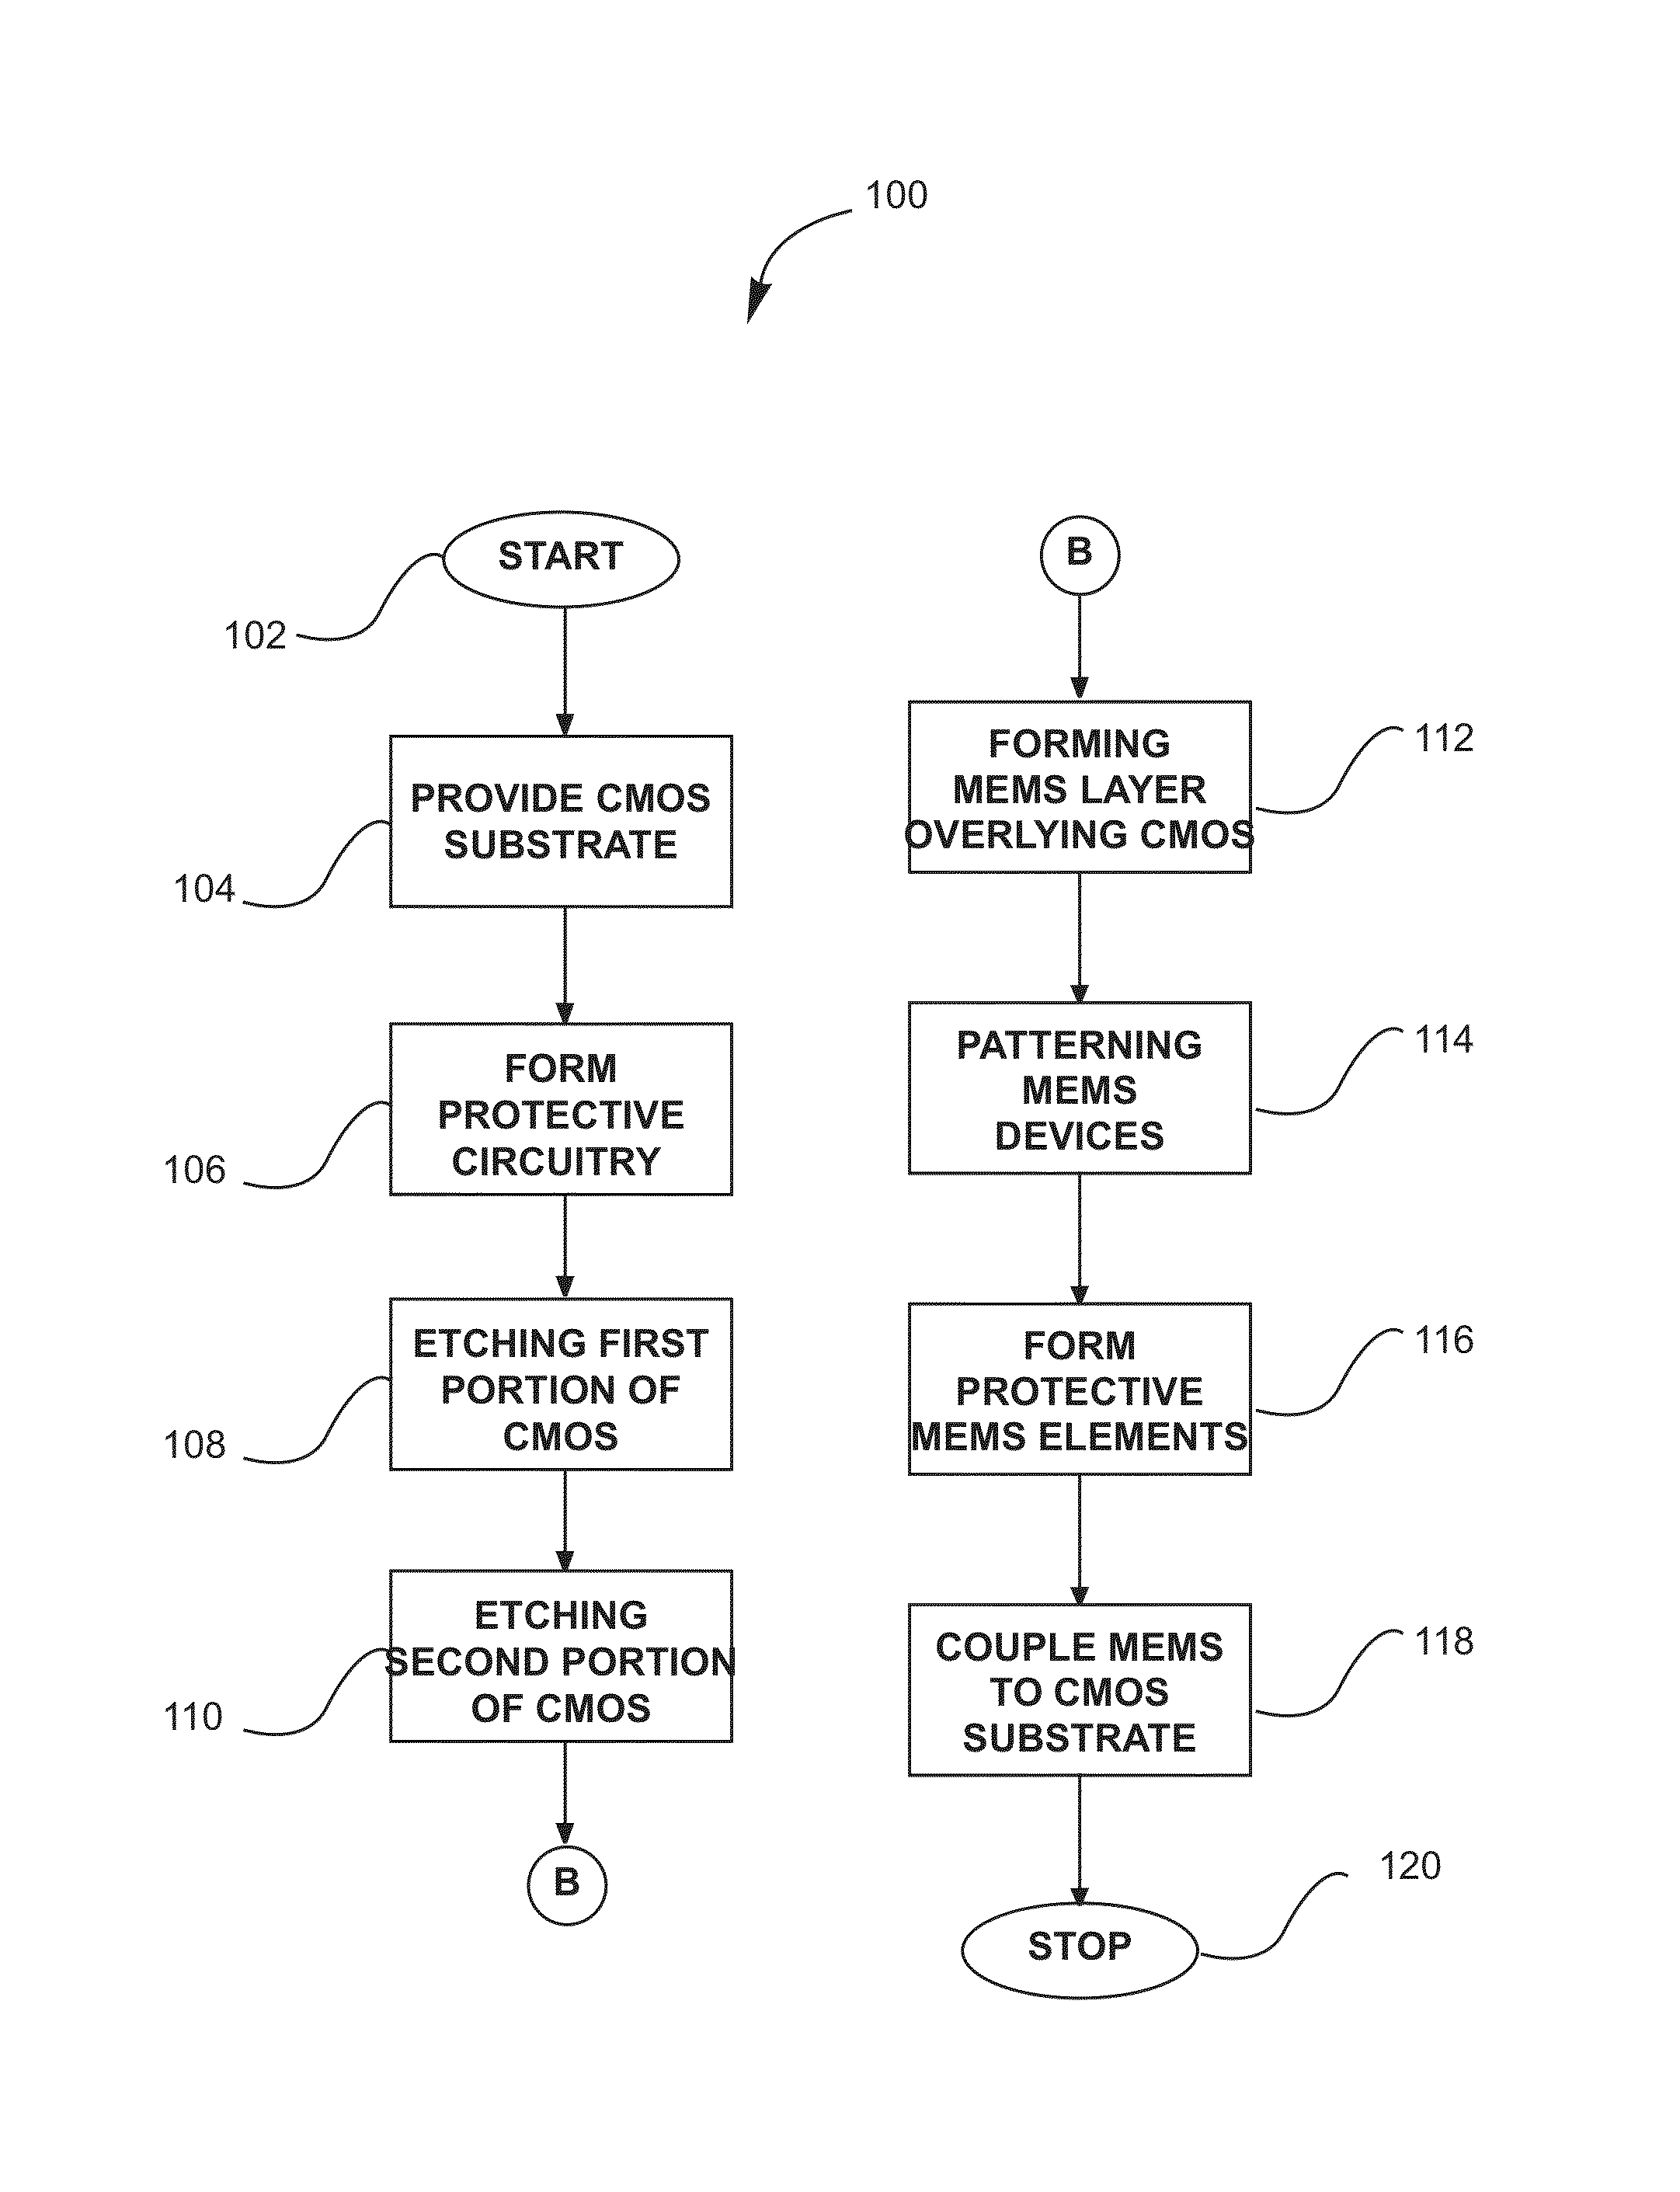 Methods and structure for adapting MEMS structures to form electrical interconnections for integrated circuits